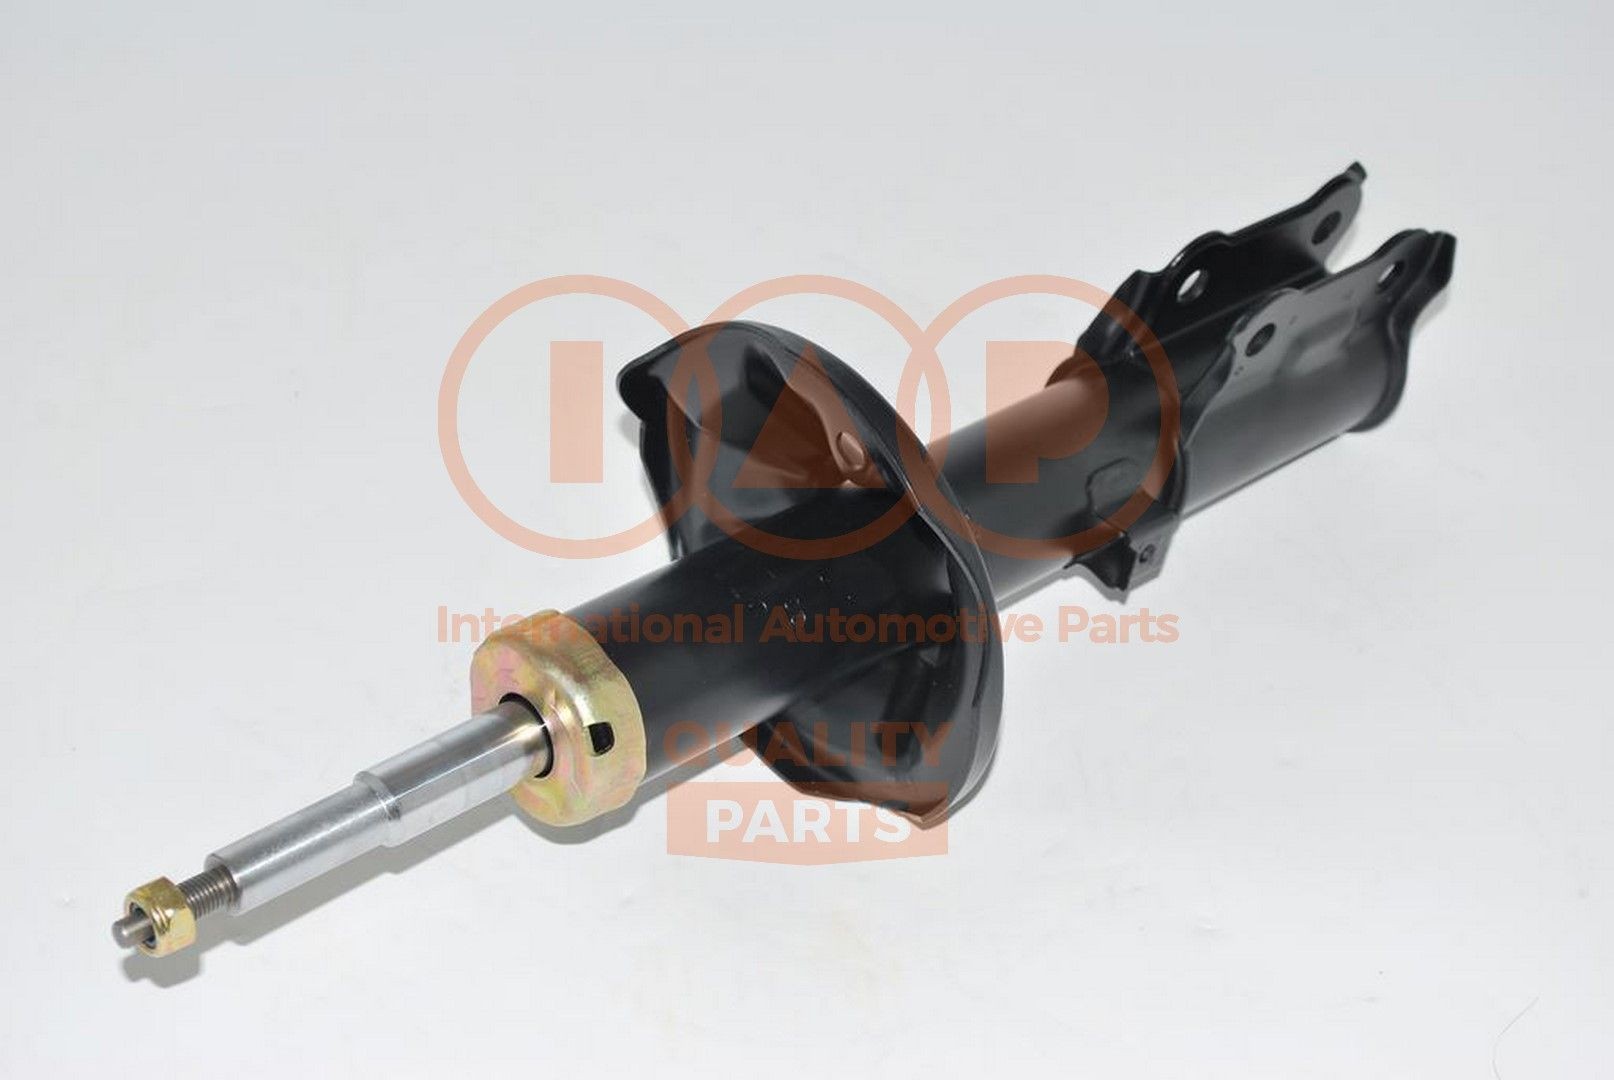 IAP QUALITY PARTS 504-07092 Shock absorber 54660-02320